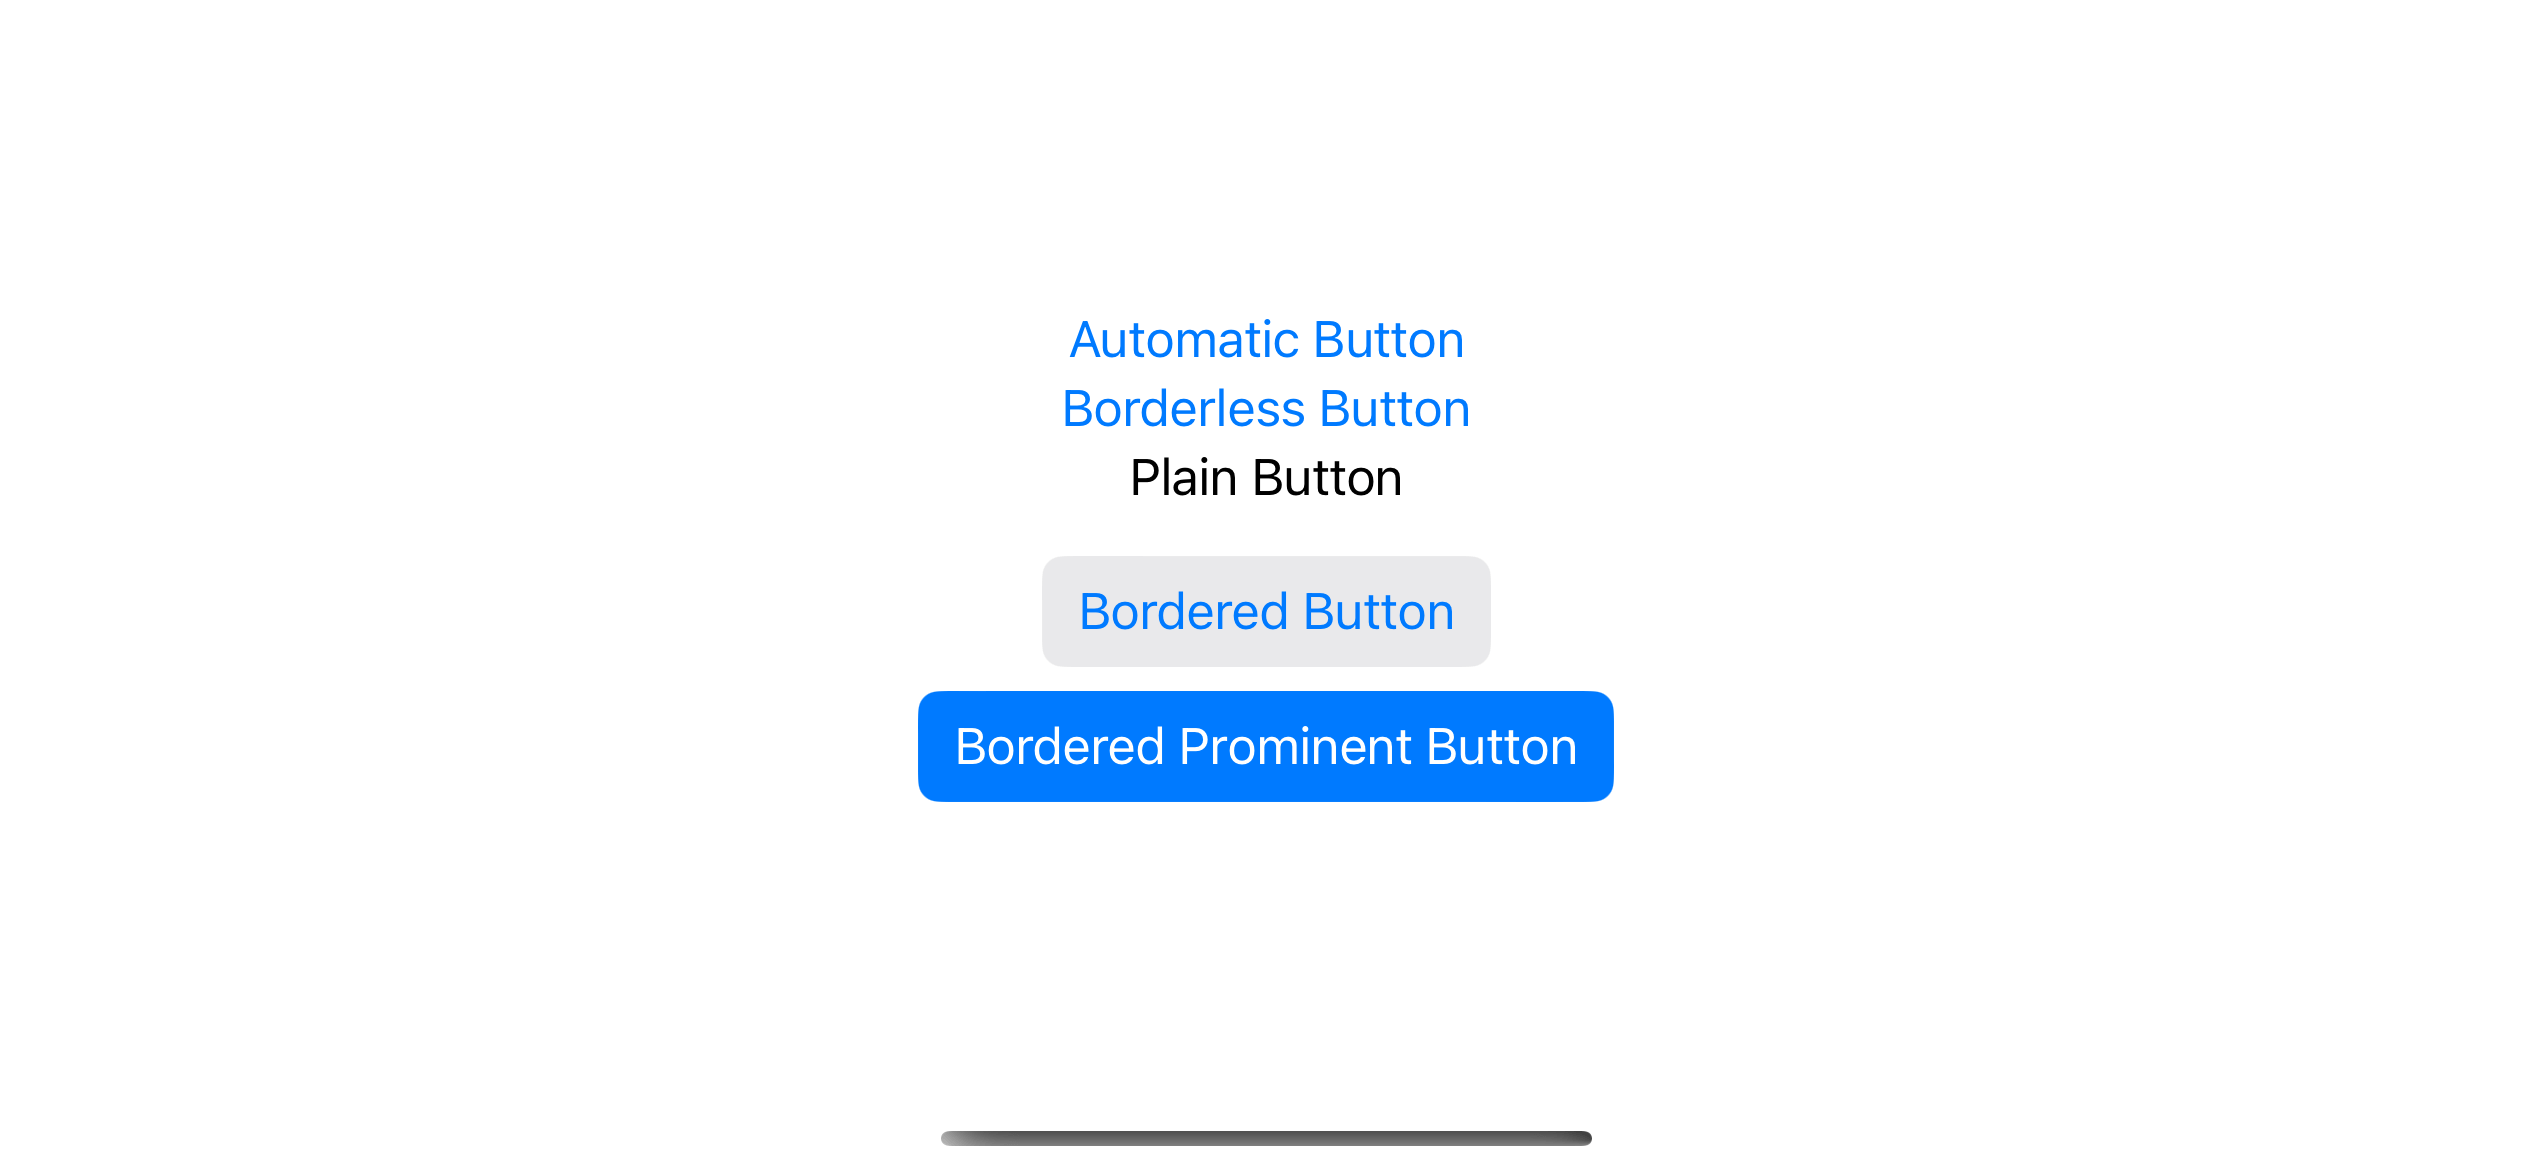 Built-in Button styles in iOS.